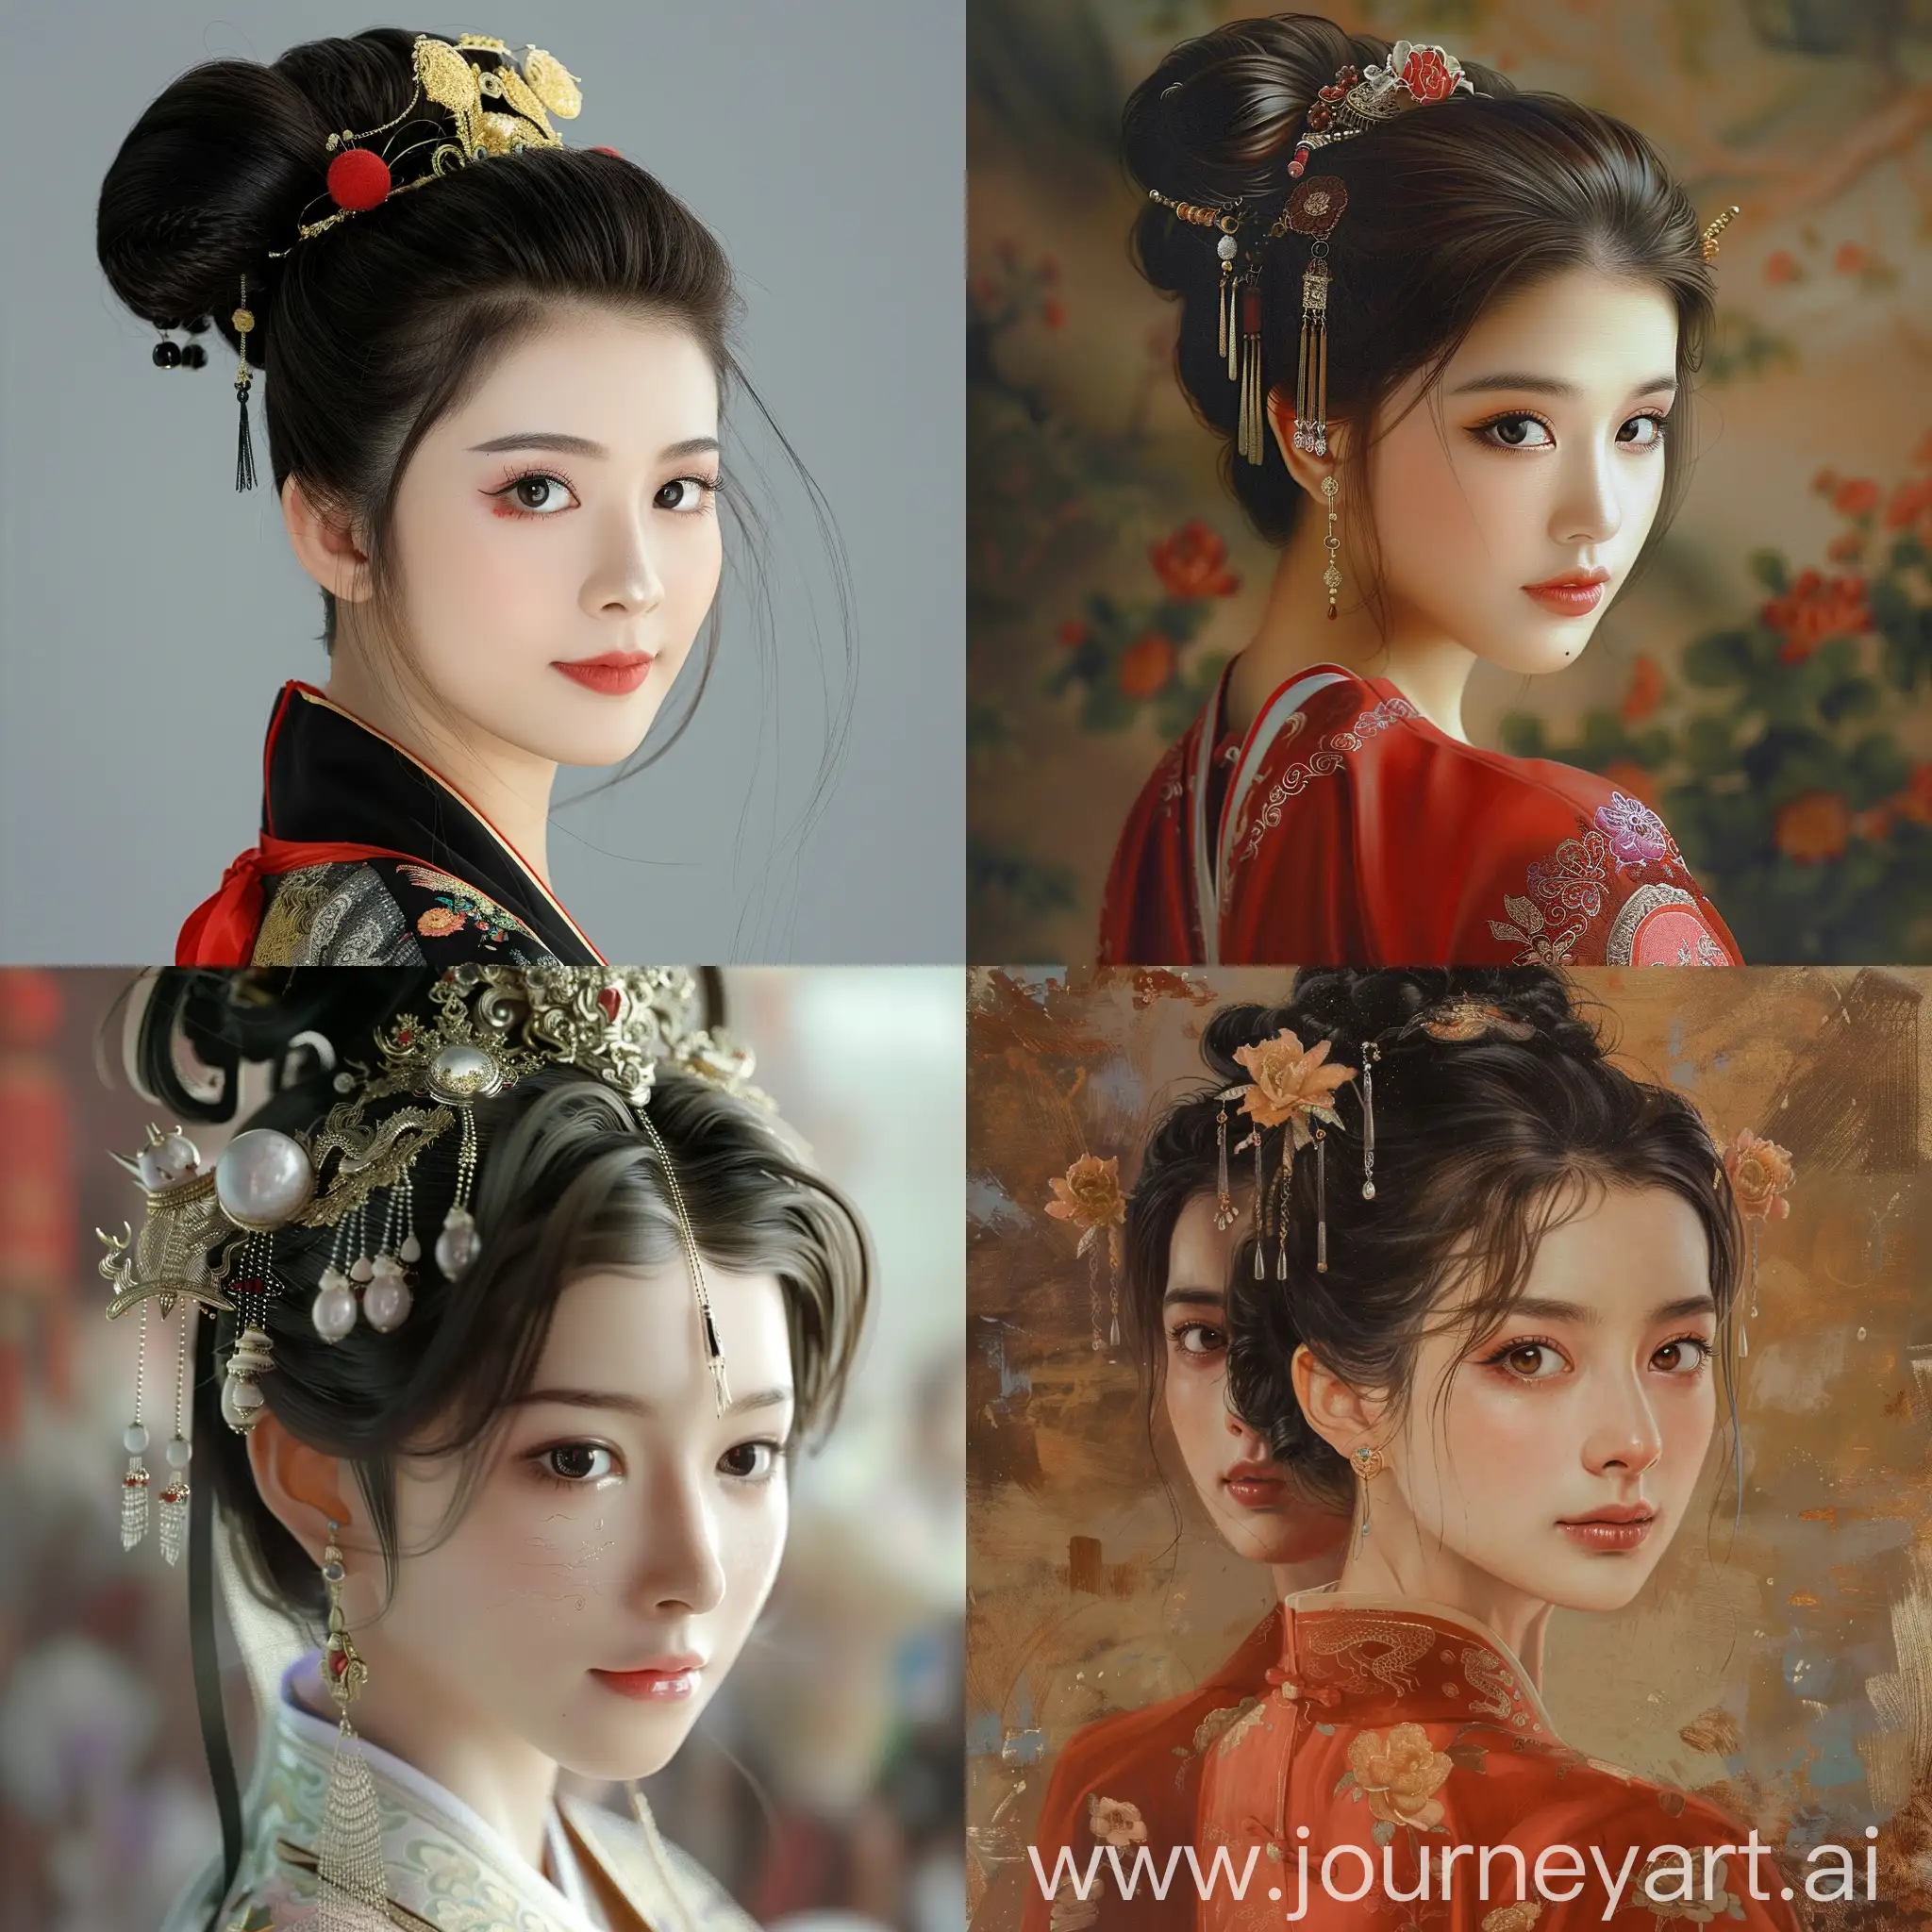 Elegant-Chinese-Woman-with-Classic-Hairstyle-Portrait